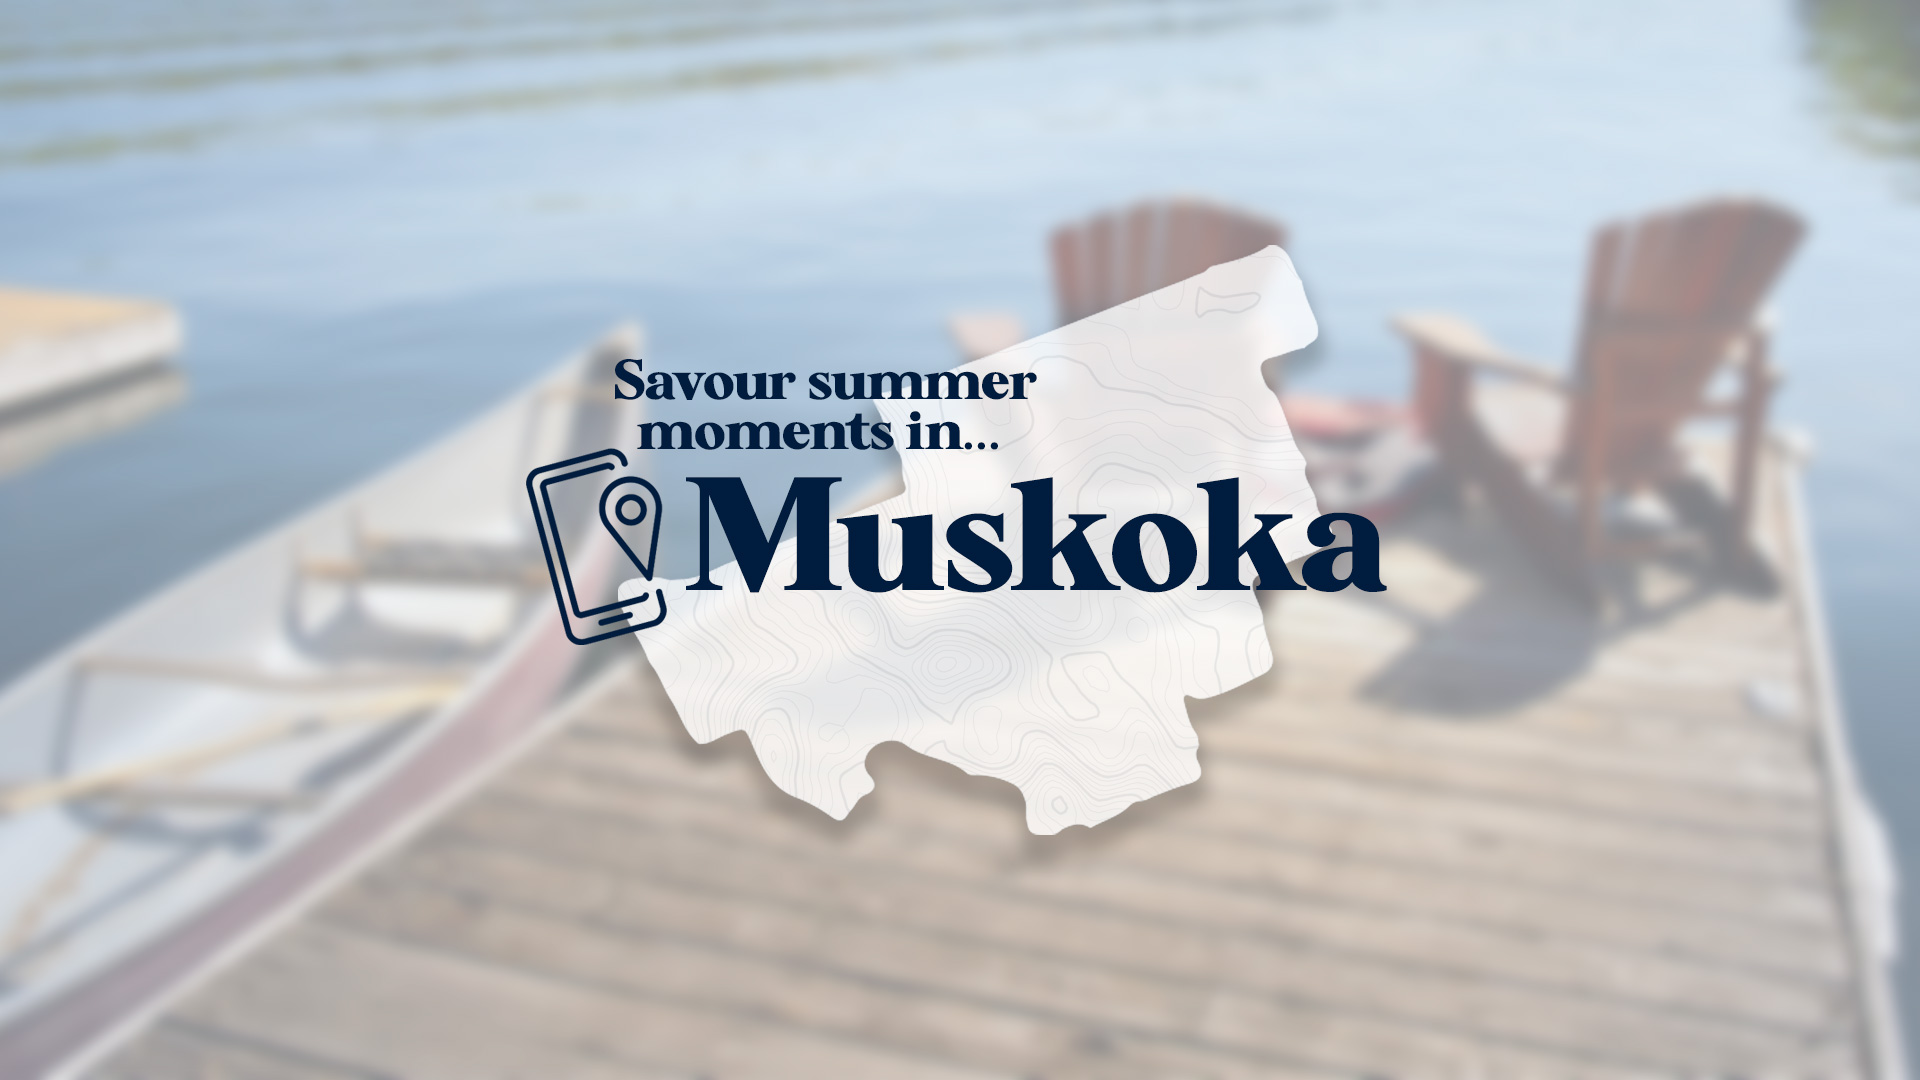 Savour Summer Moments in Muskoka logo over top of an image of chairs and a canoe by a lake.